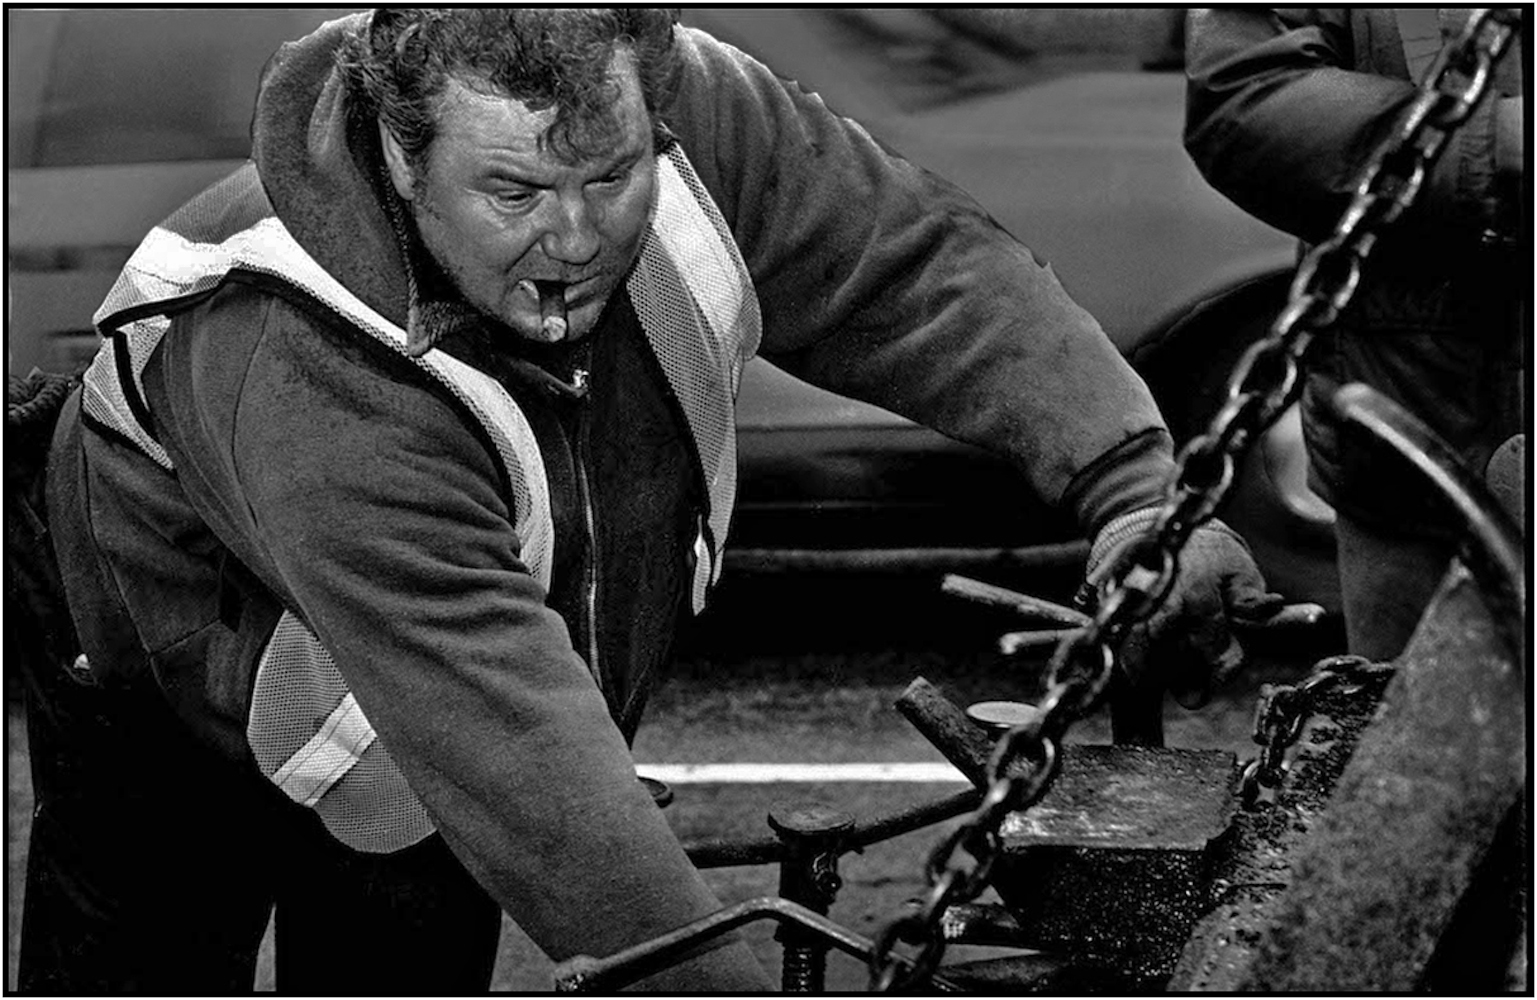   Highway Repairer works on a resurfacing gang on an extensive area of Central Park roadway in Manhattan. 1984.  